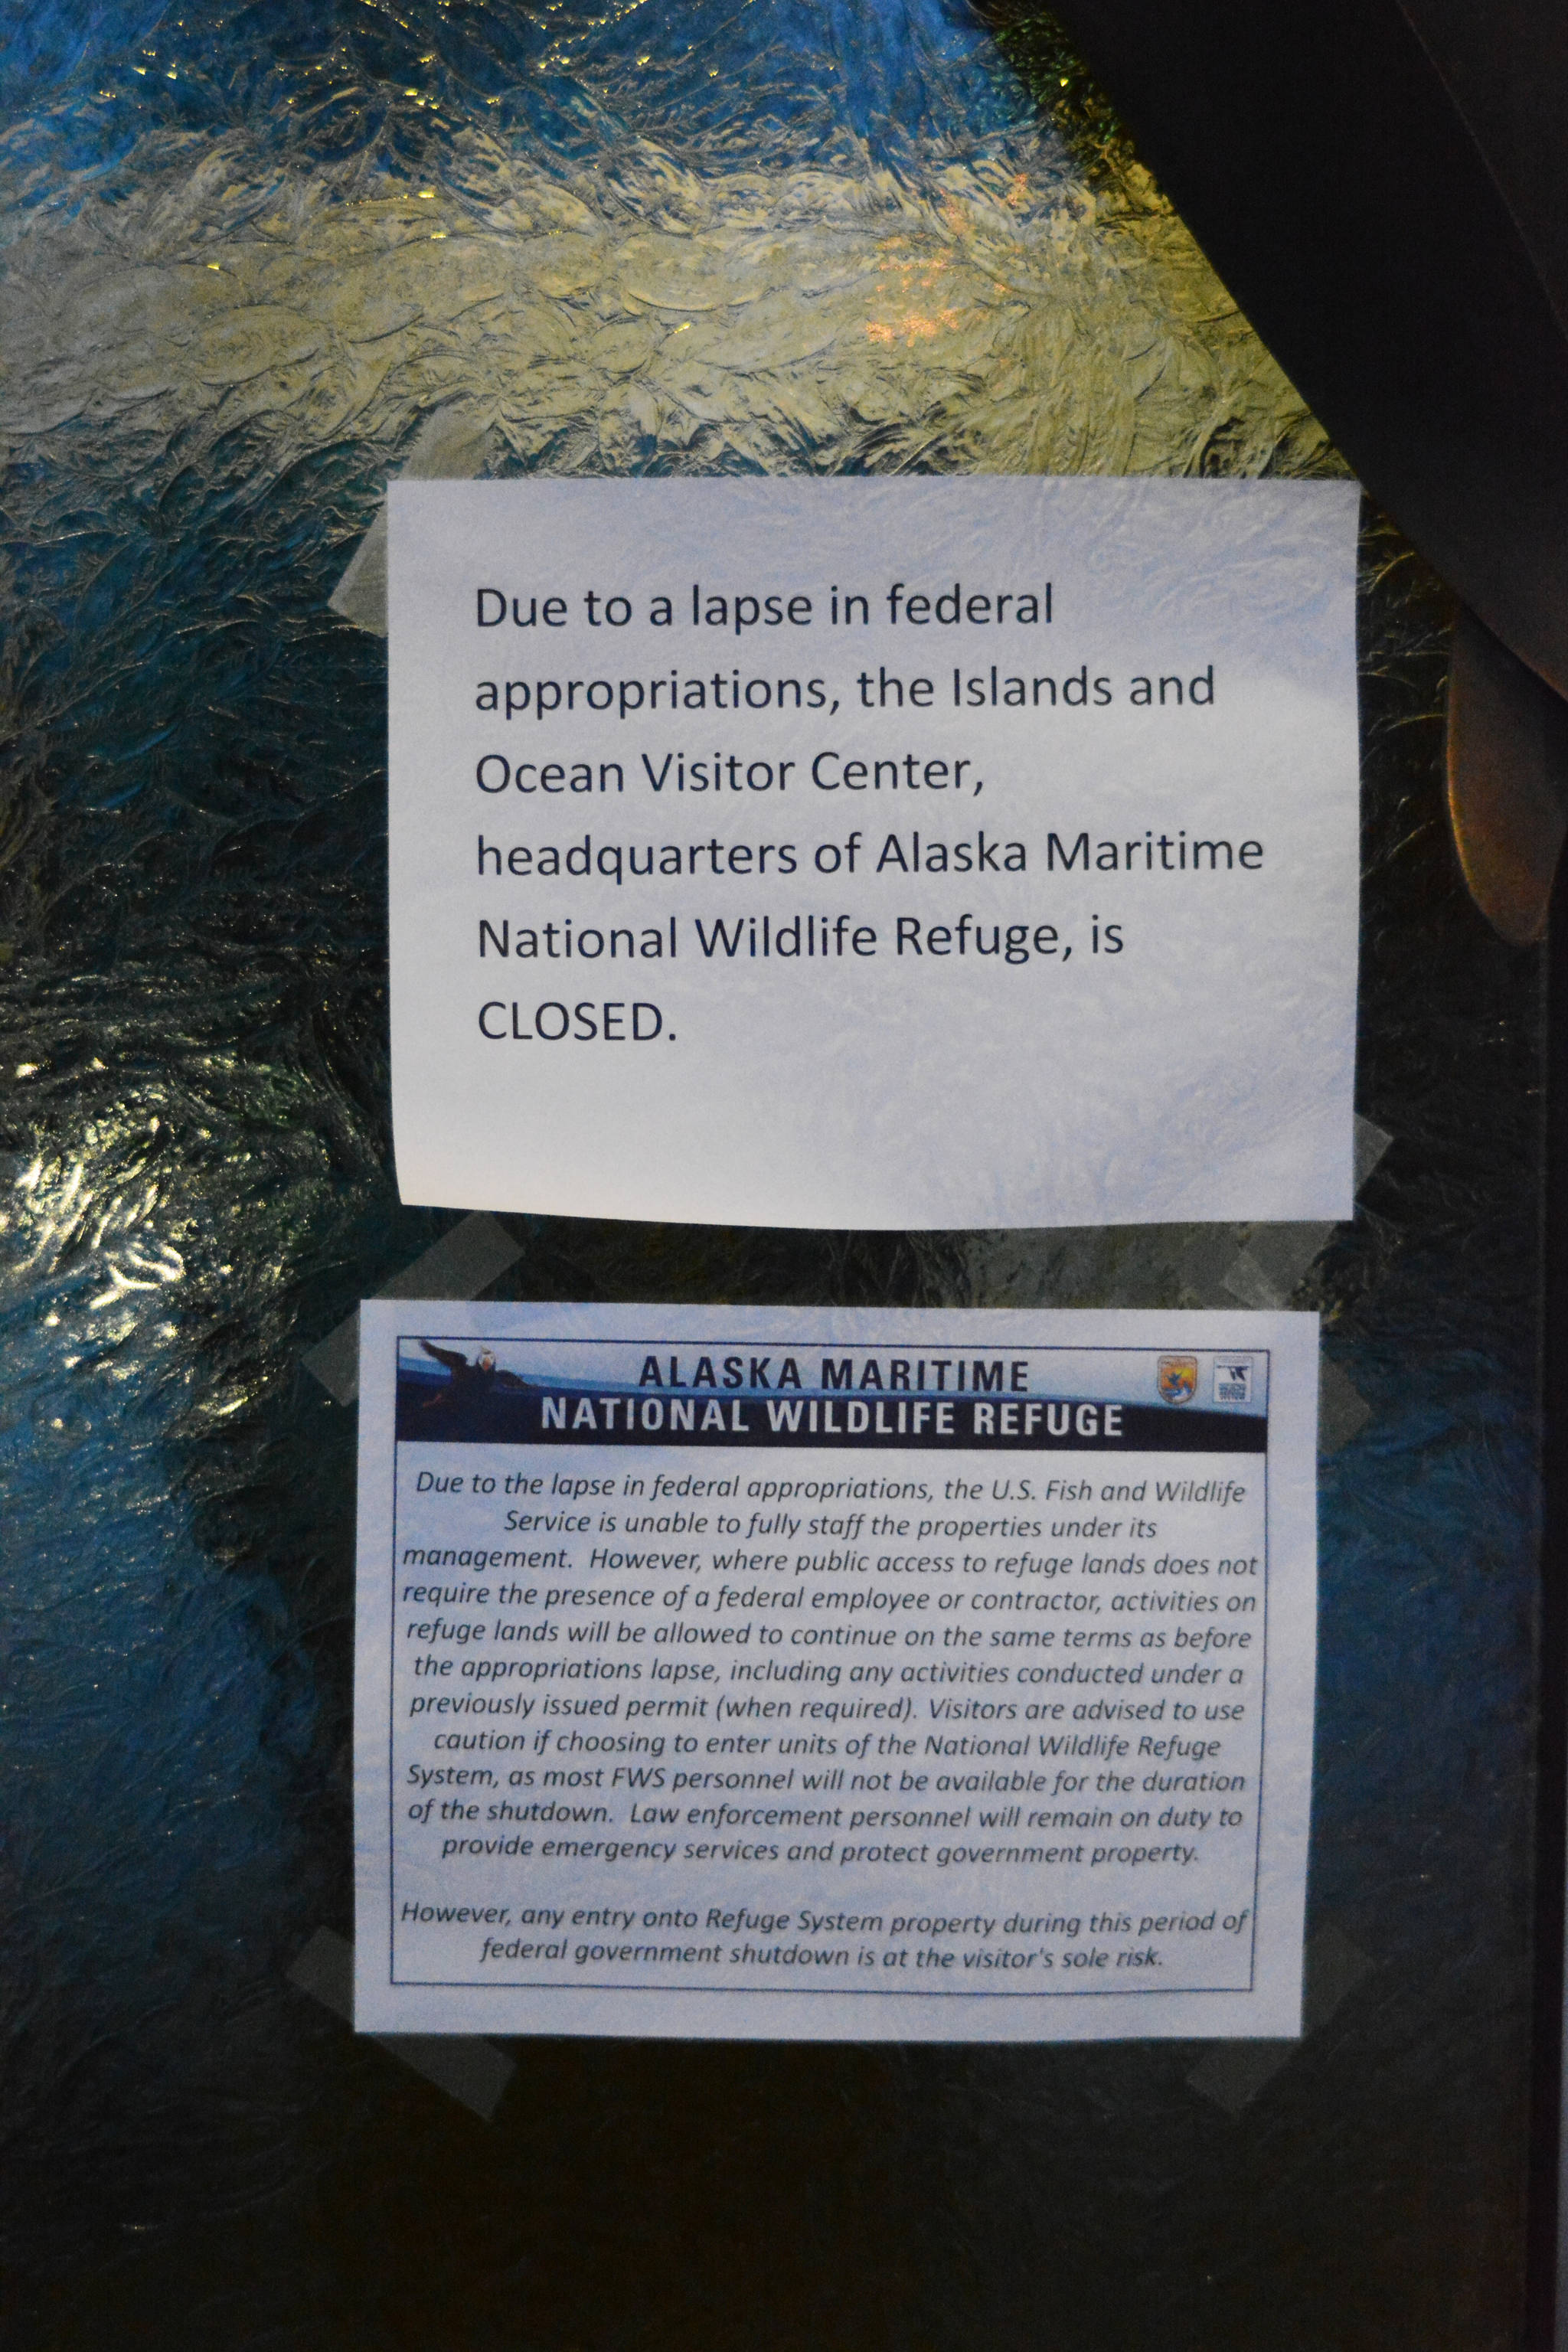 A sign on the door last Friday, Dec. 28, of the Alaska Islands and Ocean Visitor Center in Homer, Alaska, indicates that the headquarters of the Alaska Maritime National Wildlife Refuge is closed. Public access to refuge lands remains open, including a trail from the visitor center to Beluga Slough. (Photo by Michael Armstrong/Homer News)